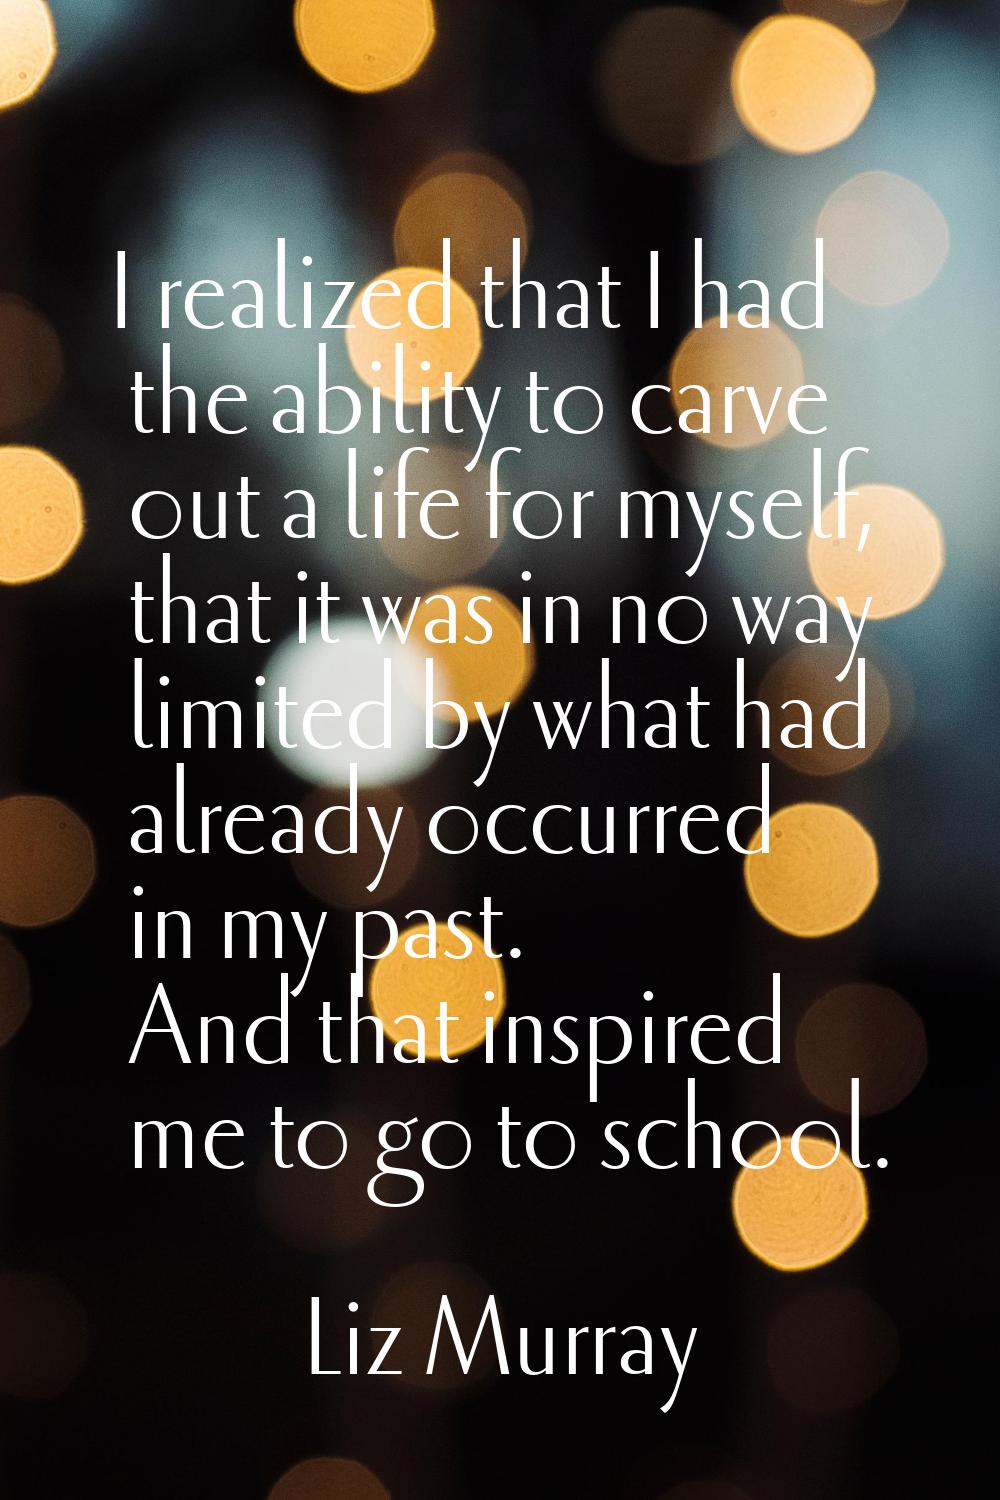 I realized that I had the ability to carve out a life for myself, that it was in no way limited by 